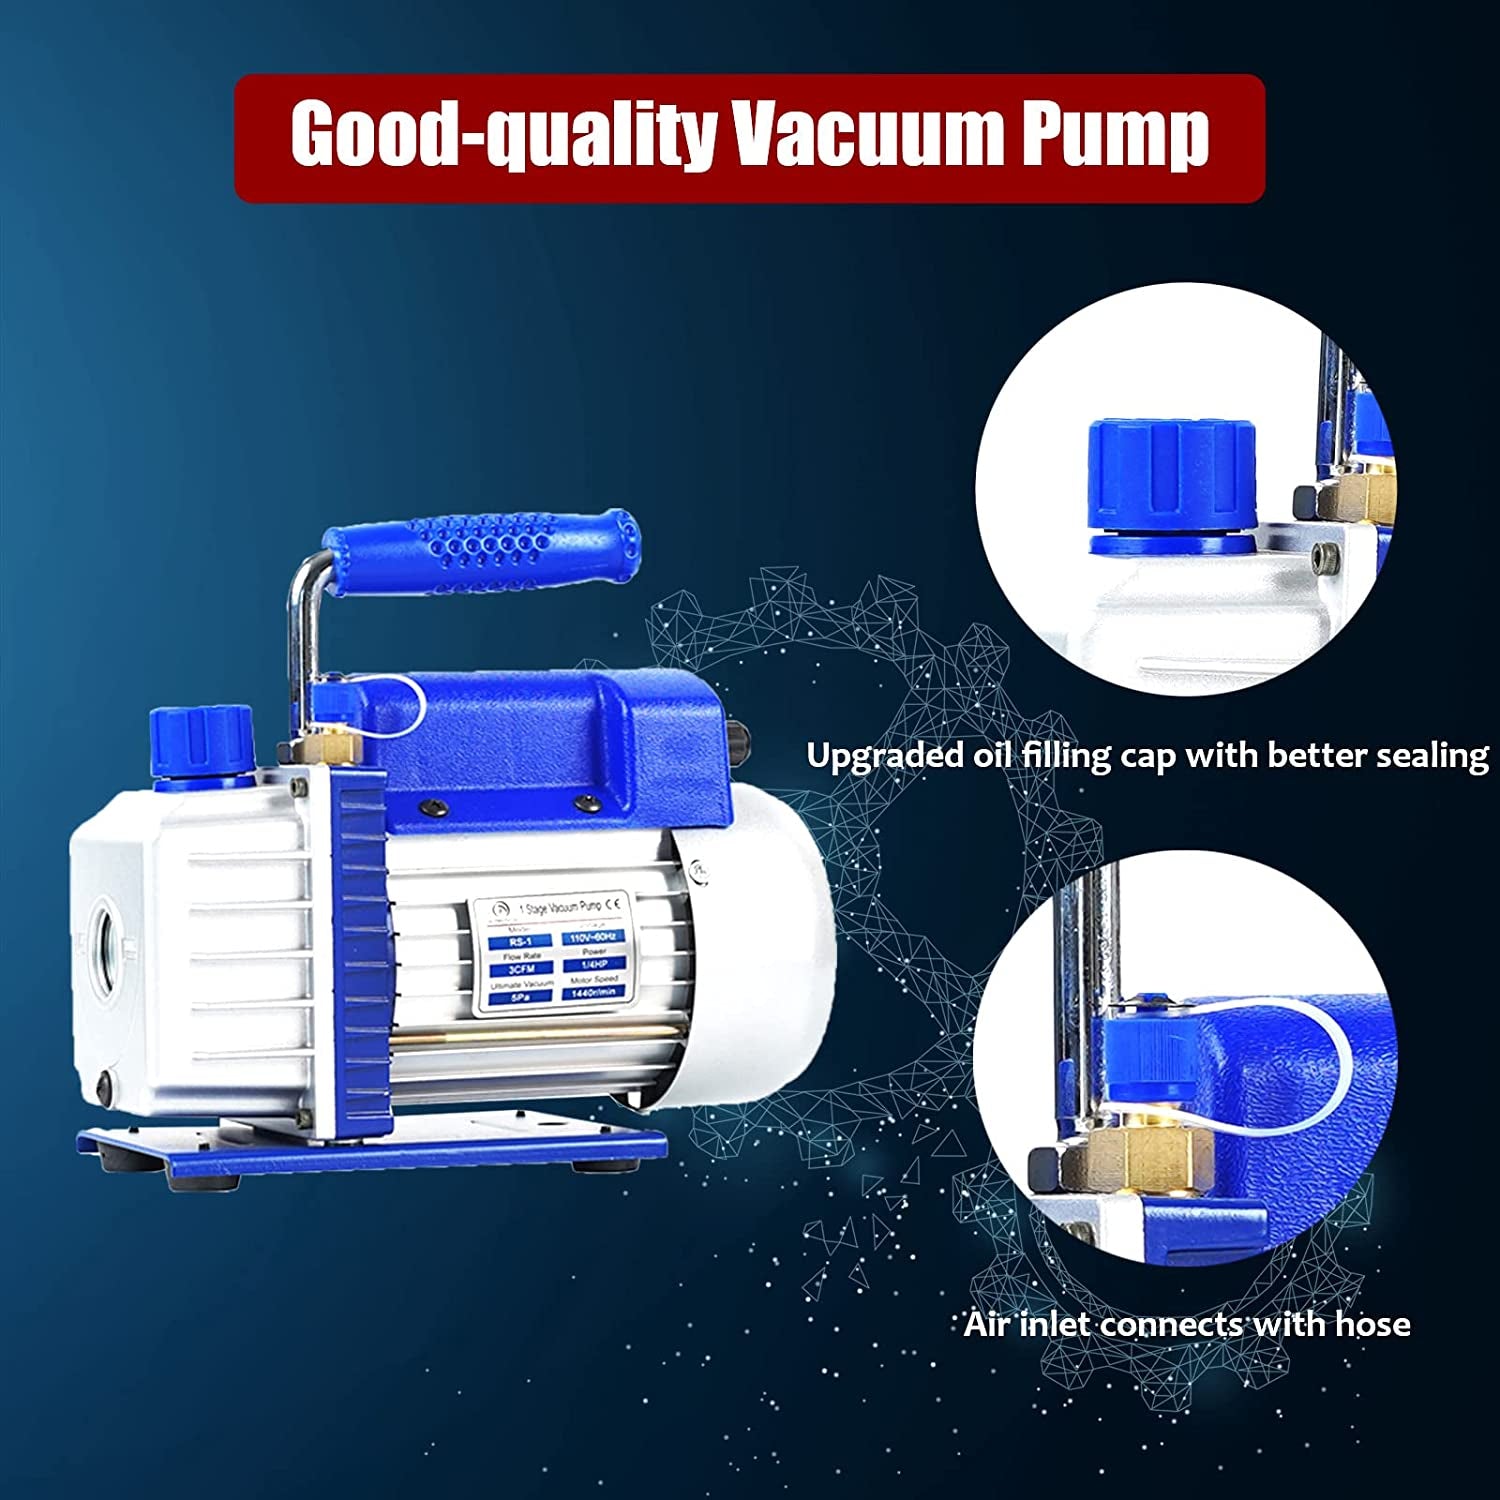 3 Gallon Vacuum Chamber with Pump, Stainless Steel Vacuum Chamber and 3CFM Vacuum Pump, Vacuum Degassing Chamber Kit with Tempered Glass Lid, Perfect for Resin, Wood Stabilizing, No Oil Included